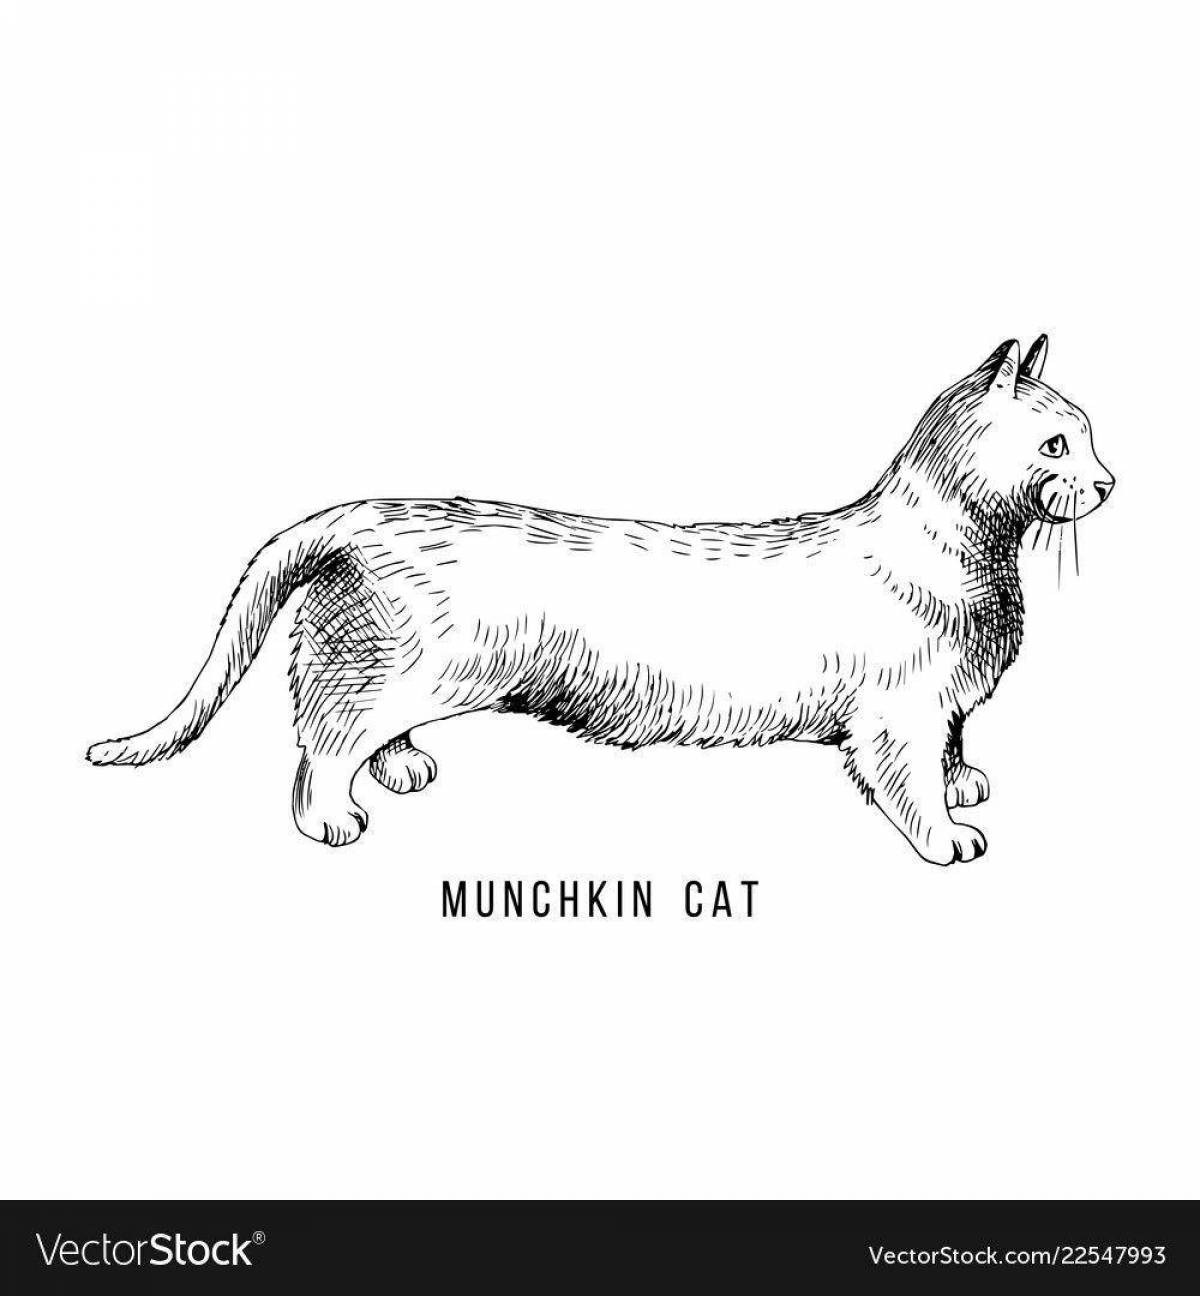 Joyful coloring of cat breeds with names